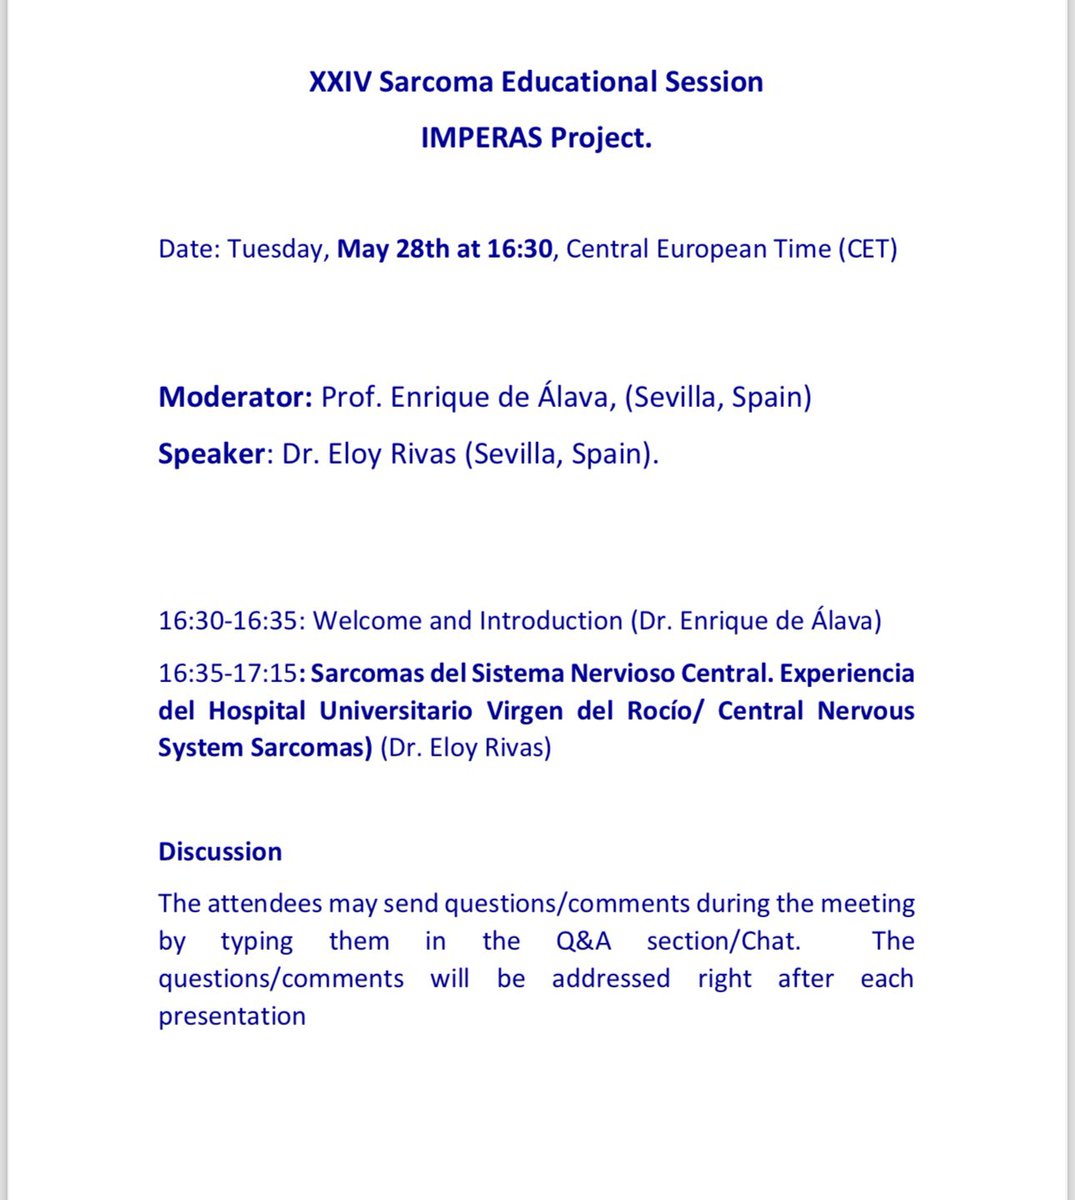 We kindly invite you to participate in the upcoming IMPERAS Sarcoma Session about CNS Sarcomas, presented by Dr. Eloy Rivas and moderate by Prof. Enrique de Alava from Sevilla at May 28th Should you need the link, please don’t hesitate to contact us Isidro.machado@uv.es